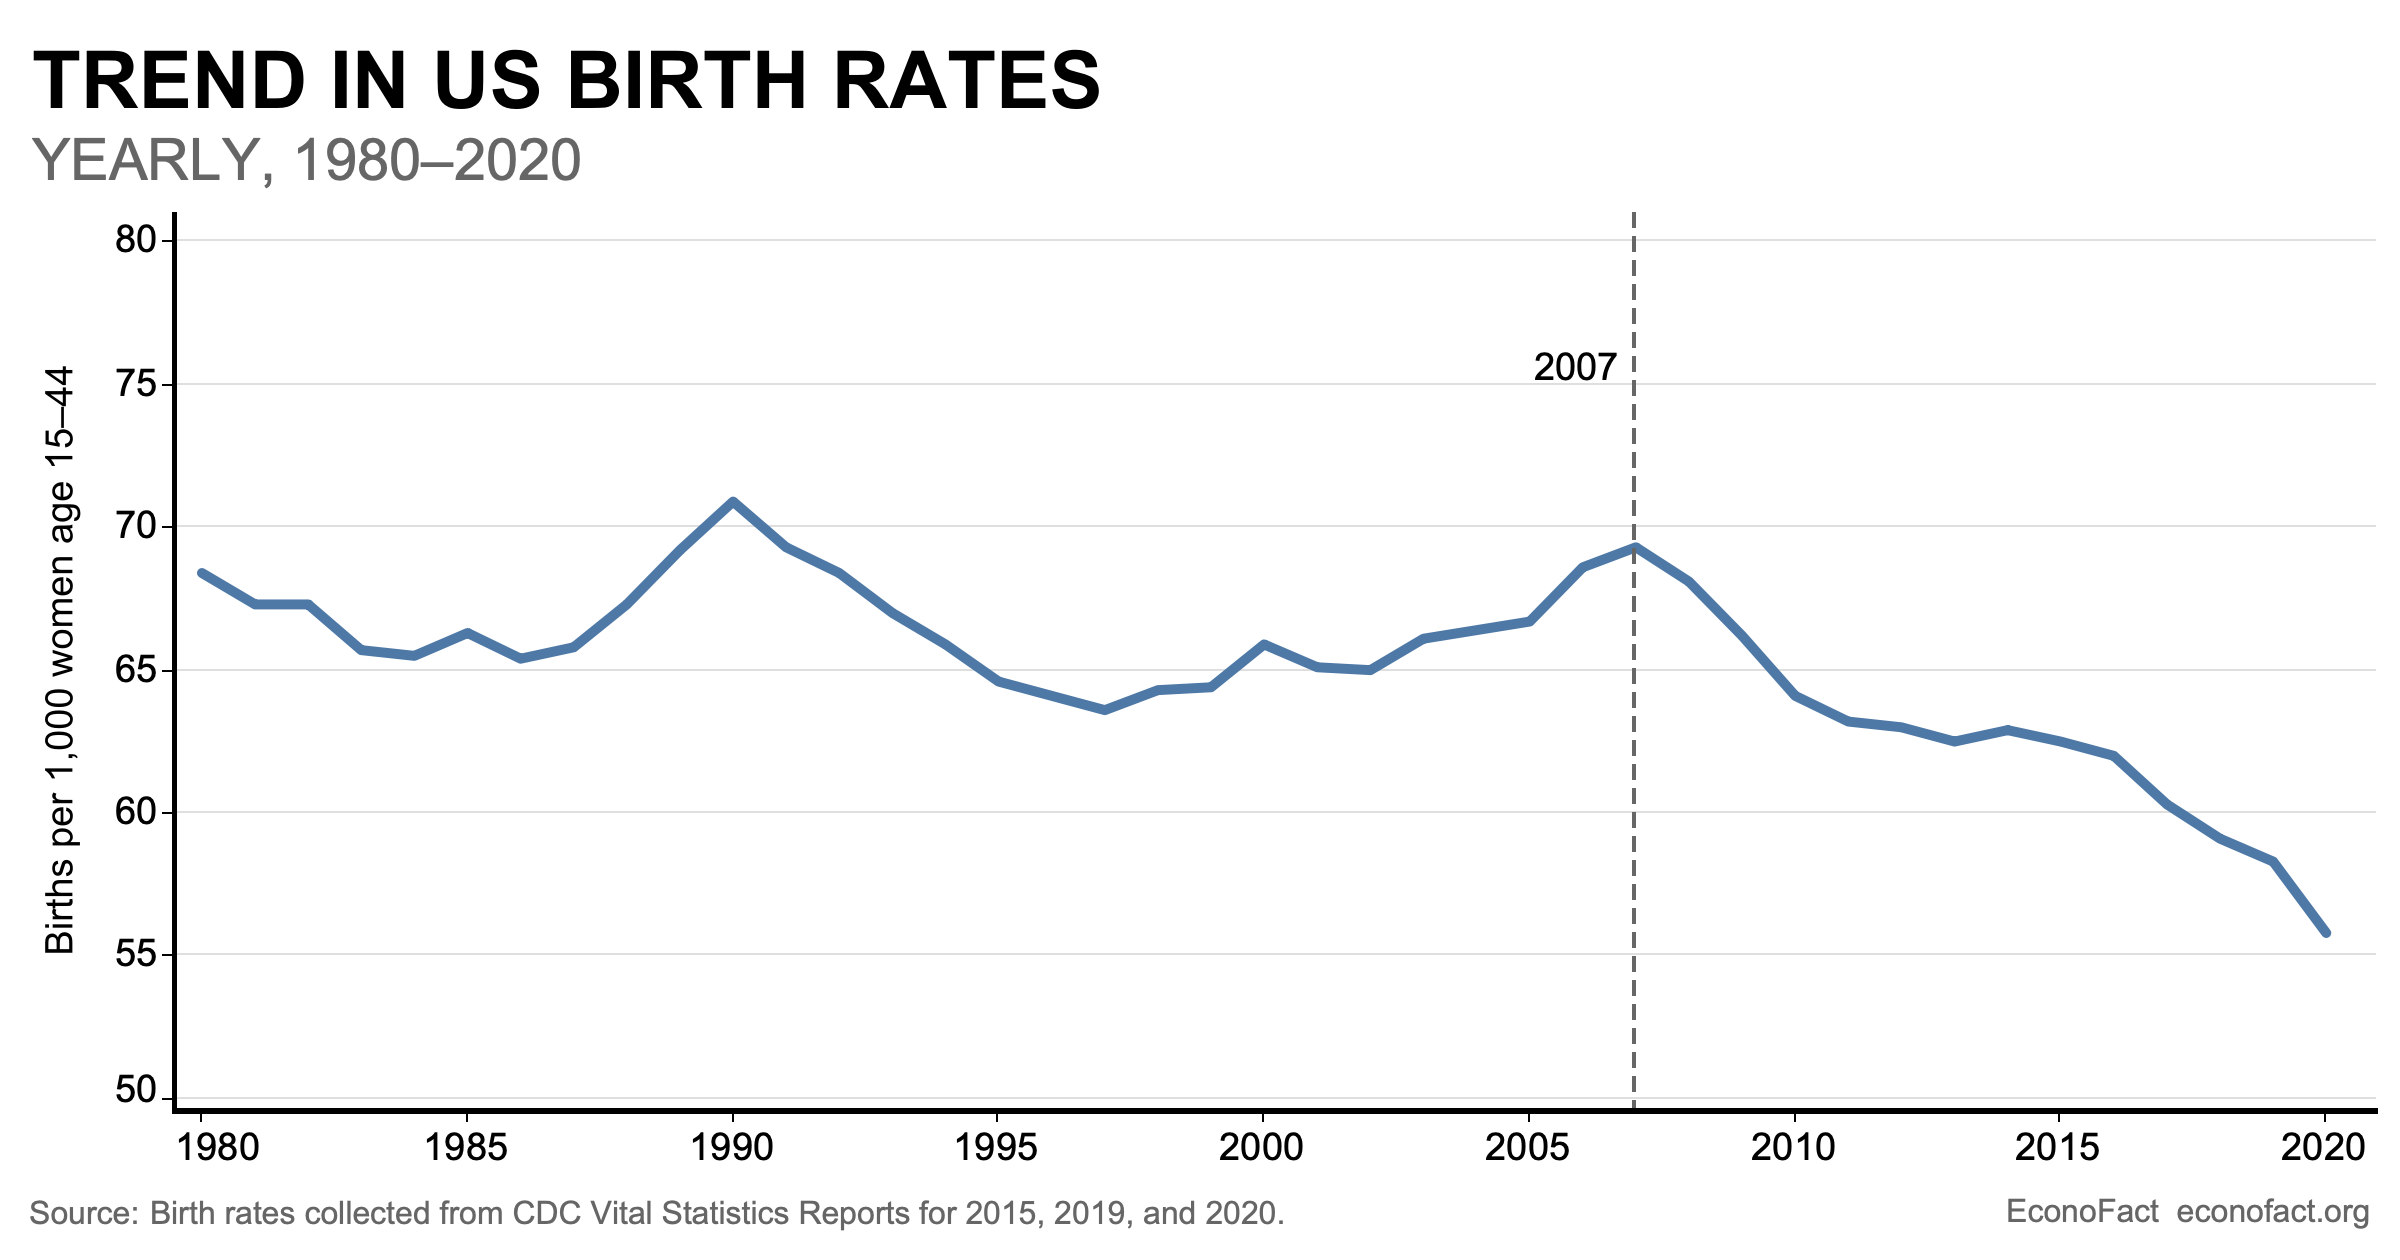 Up until the Great Recession, the number of babies born per woman in the United States had been quite stable for the previous three decades. The birth